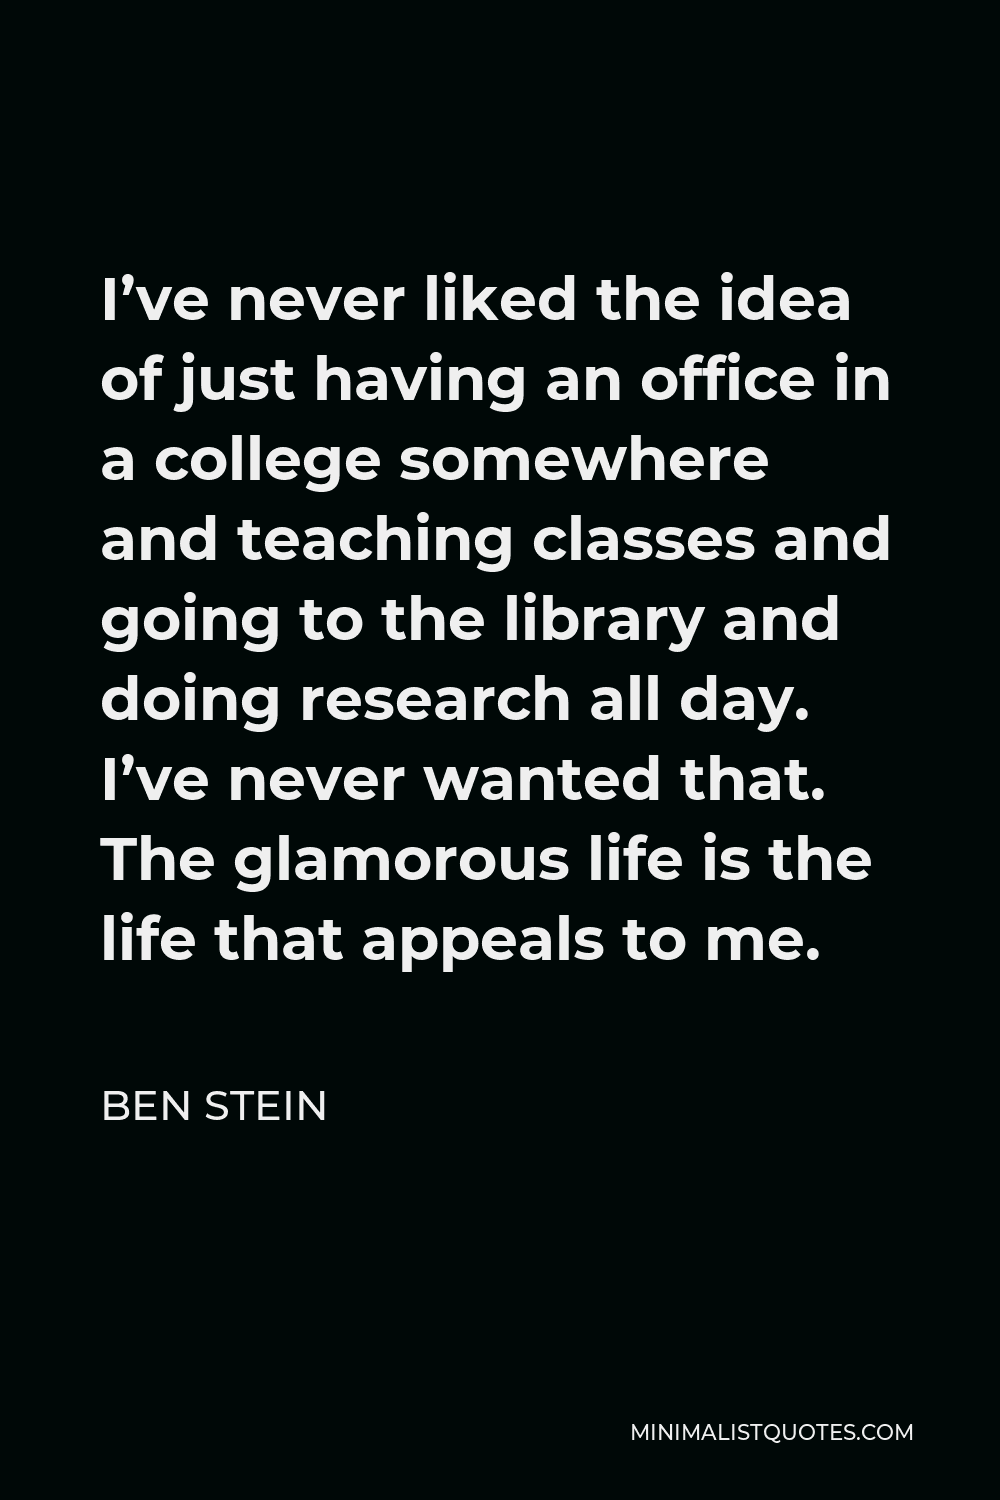 Ben Stein Quote - I’ve never liked the idea of just having an office in a college somewhere and teaching classes and going to the library and doing research all day. I’ve never wanted that. The glamorous life is the life that appeals to me.